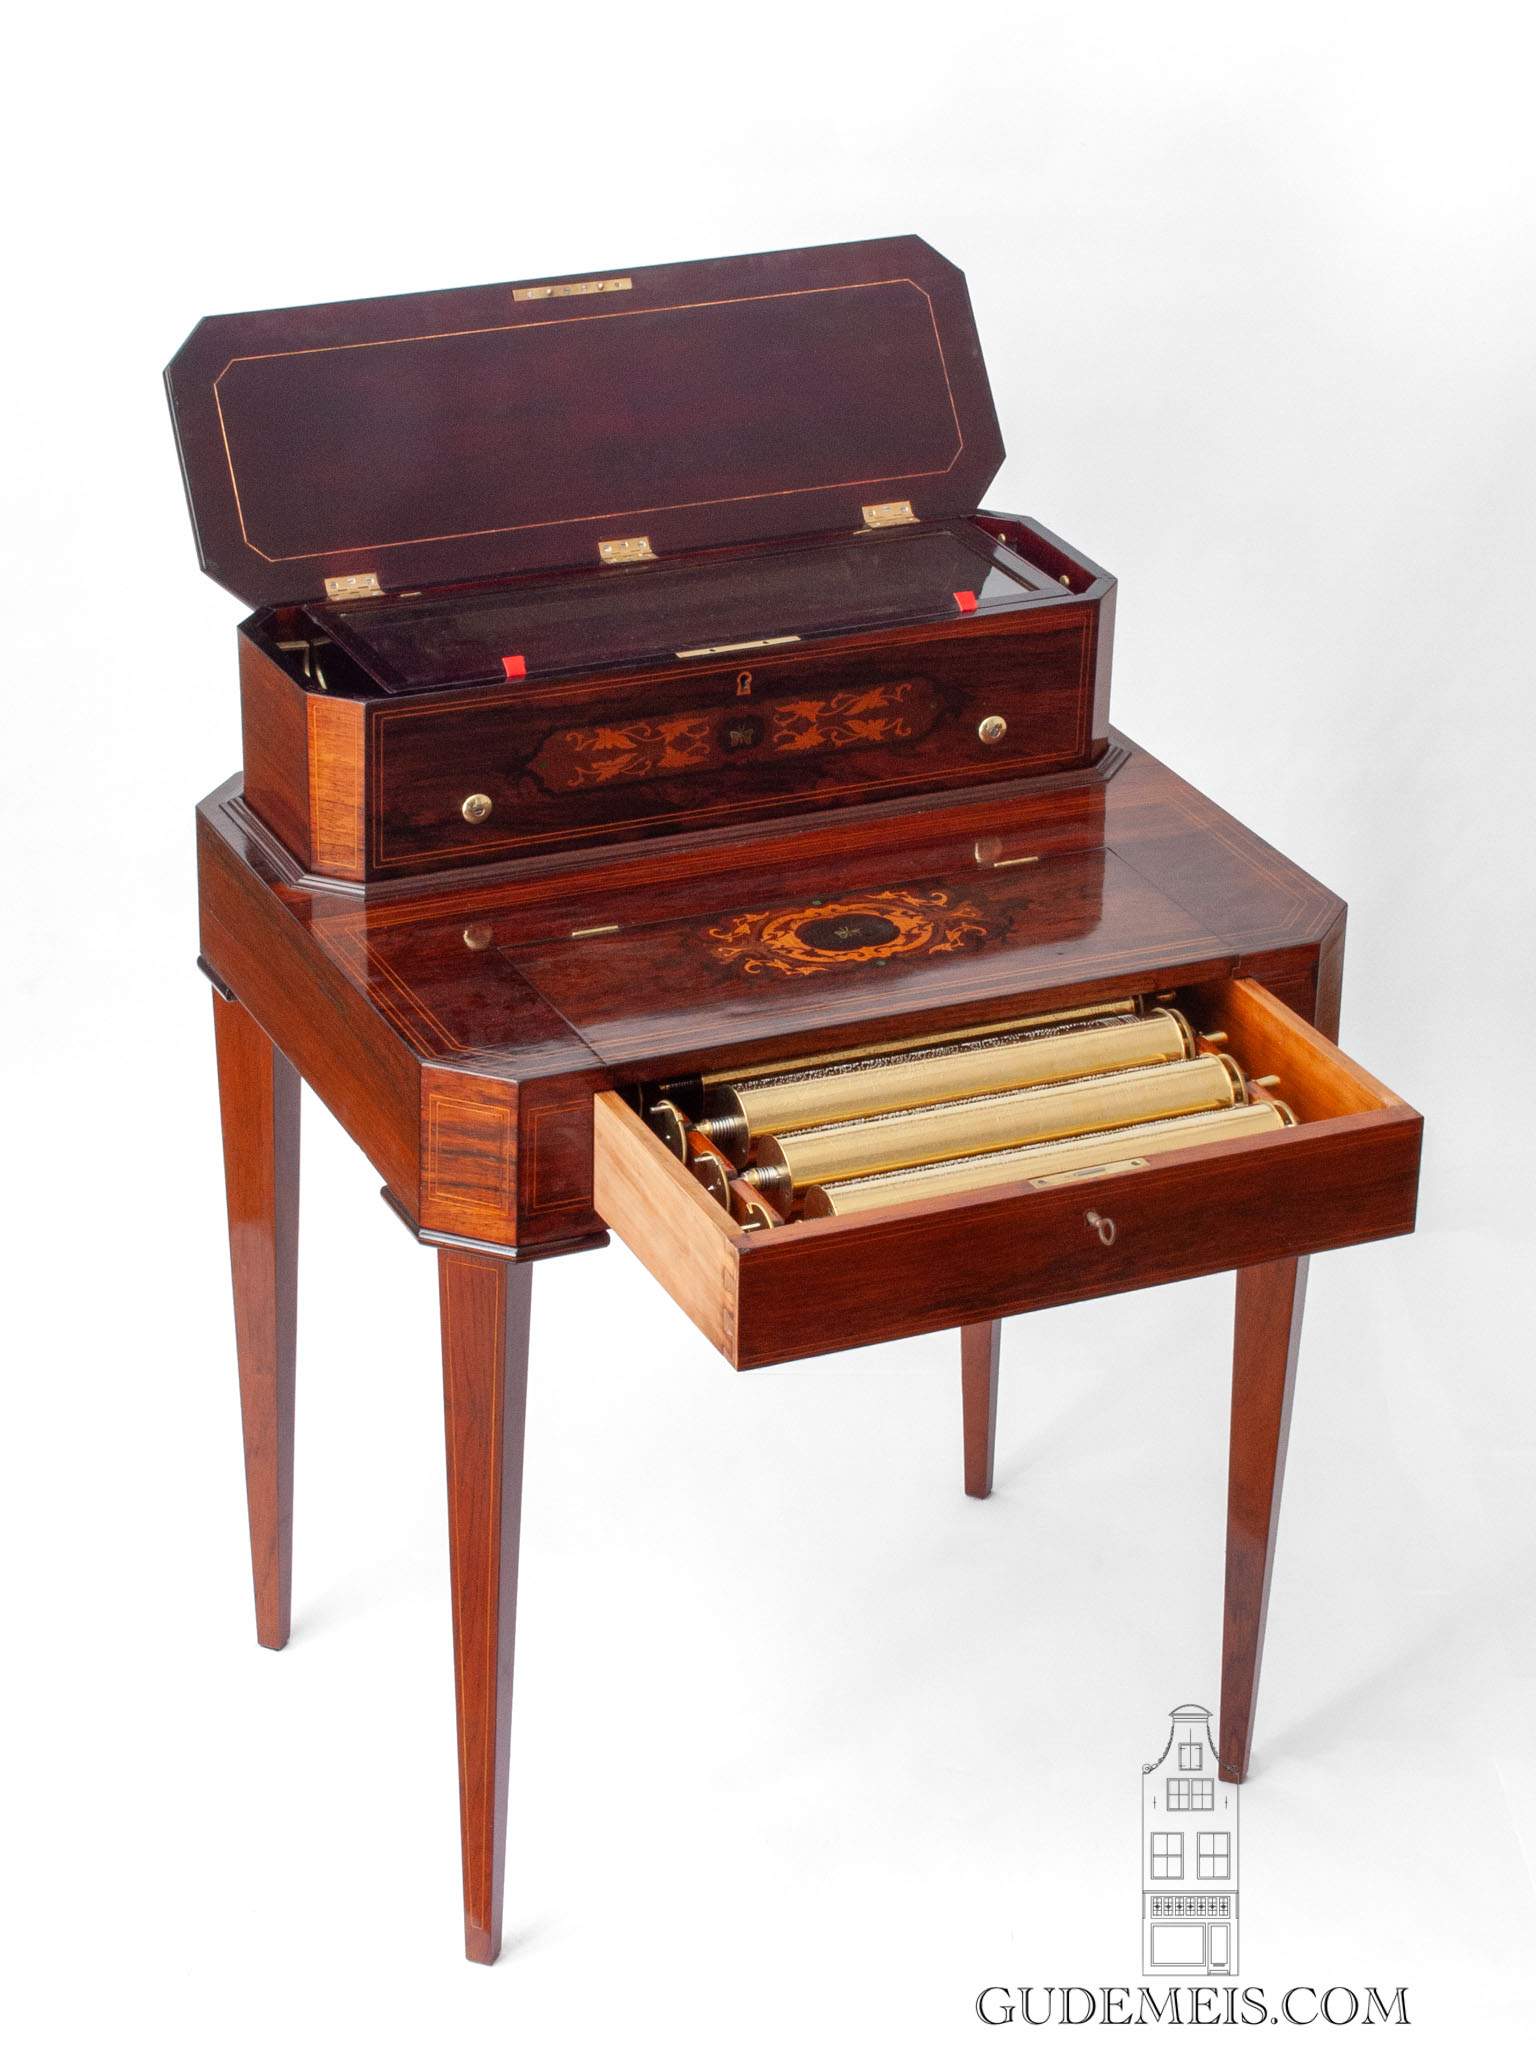 Swiss-Ducommun-girod-rosewood-marquetry-interchangeable-cylinder-music-box-table-